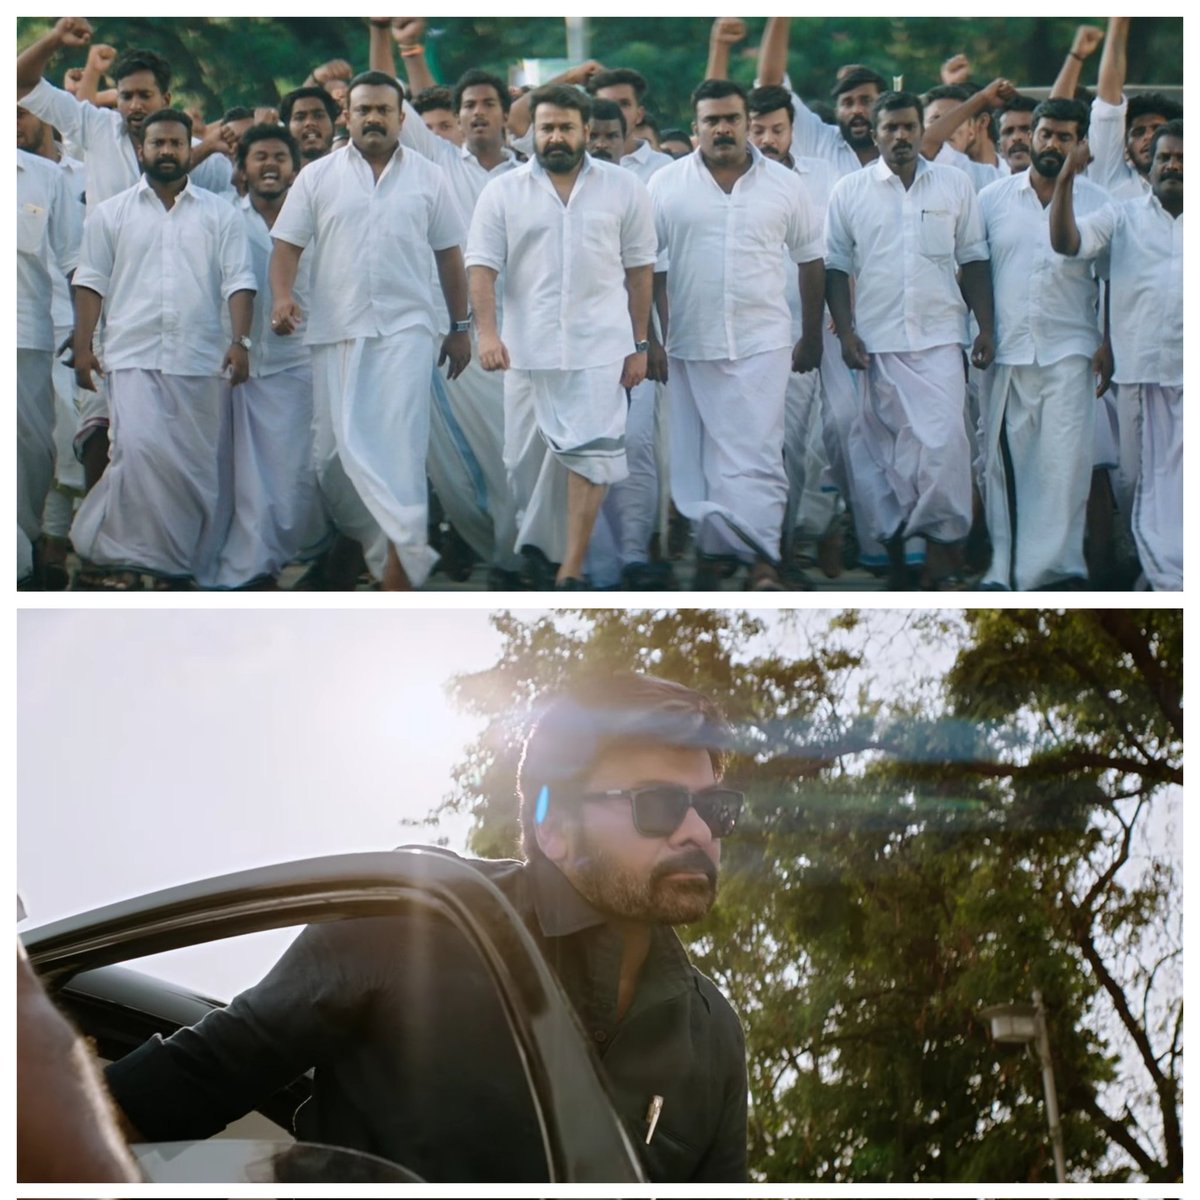 Comparing with #Mohanlal movie #Lucifer intro #Chiranjeevi movie #GodFatherFirstLook is utter waste, nothing impressed.

Dear director why you waste your brain for this intro, you just recrate original version, that's it.

First Look of #Godfather 😡😡😡